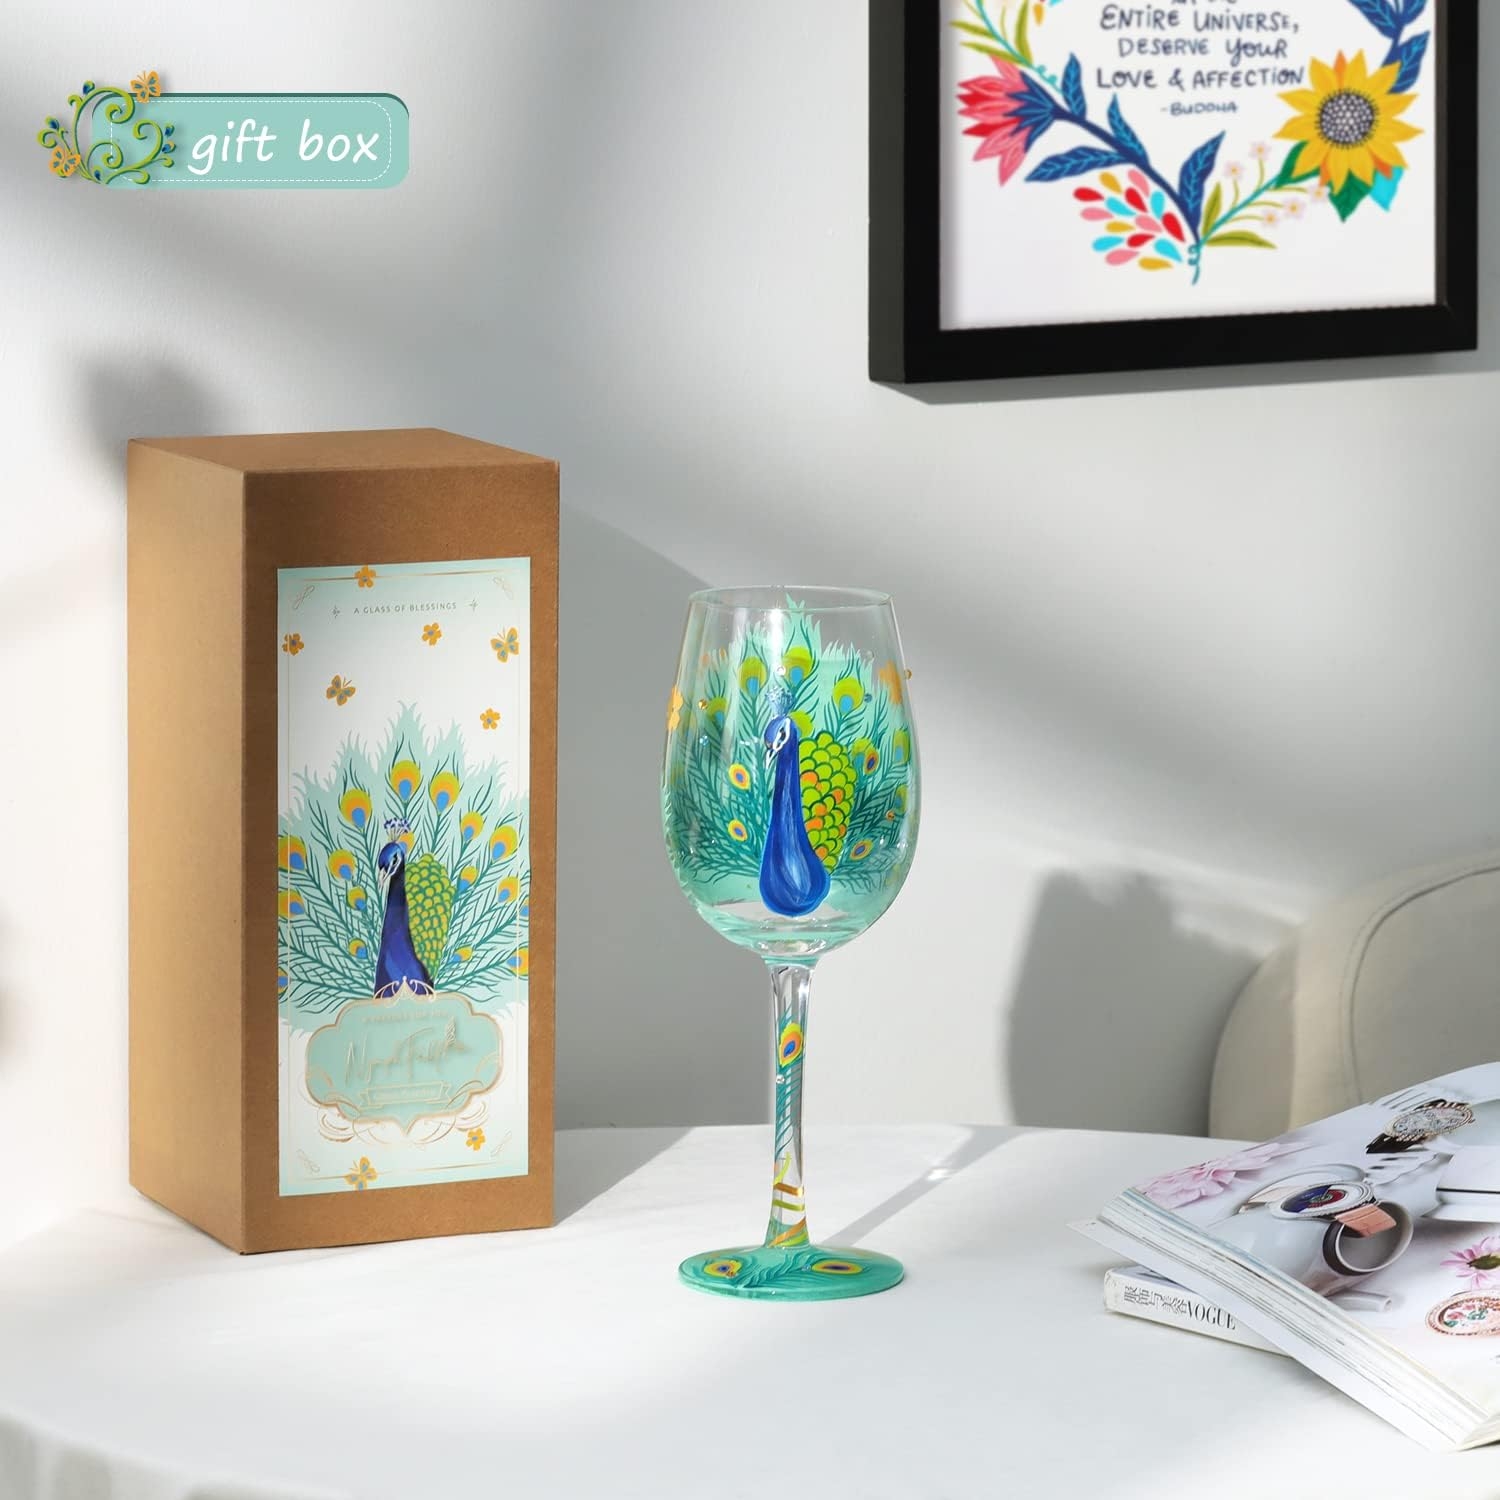 Peacock Hand Painted Wine Glass 15 oz Colorful Wine Glass Women Personalized Birthday Peacock Gift